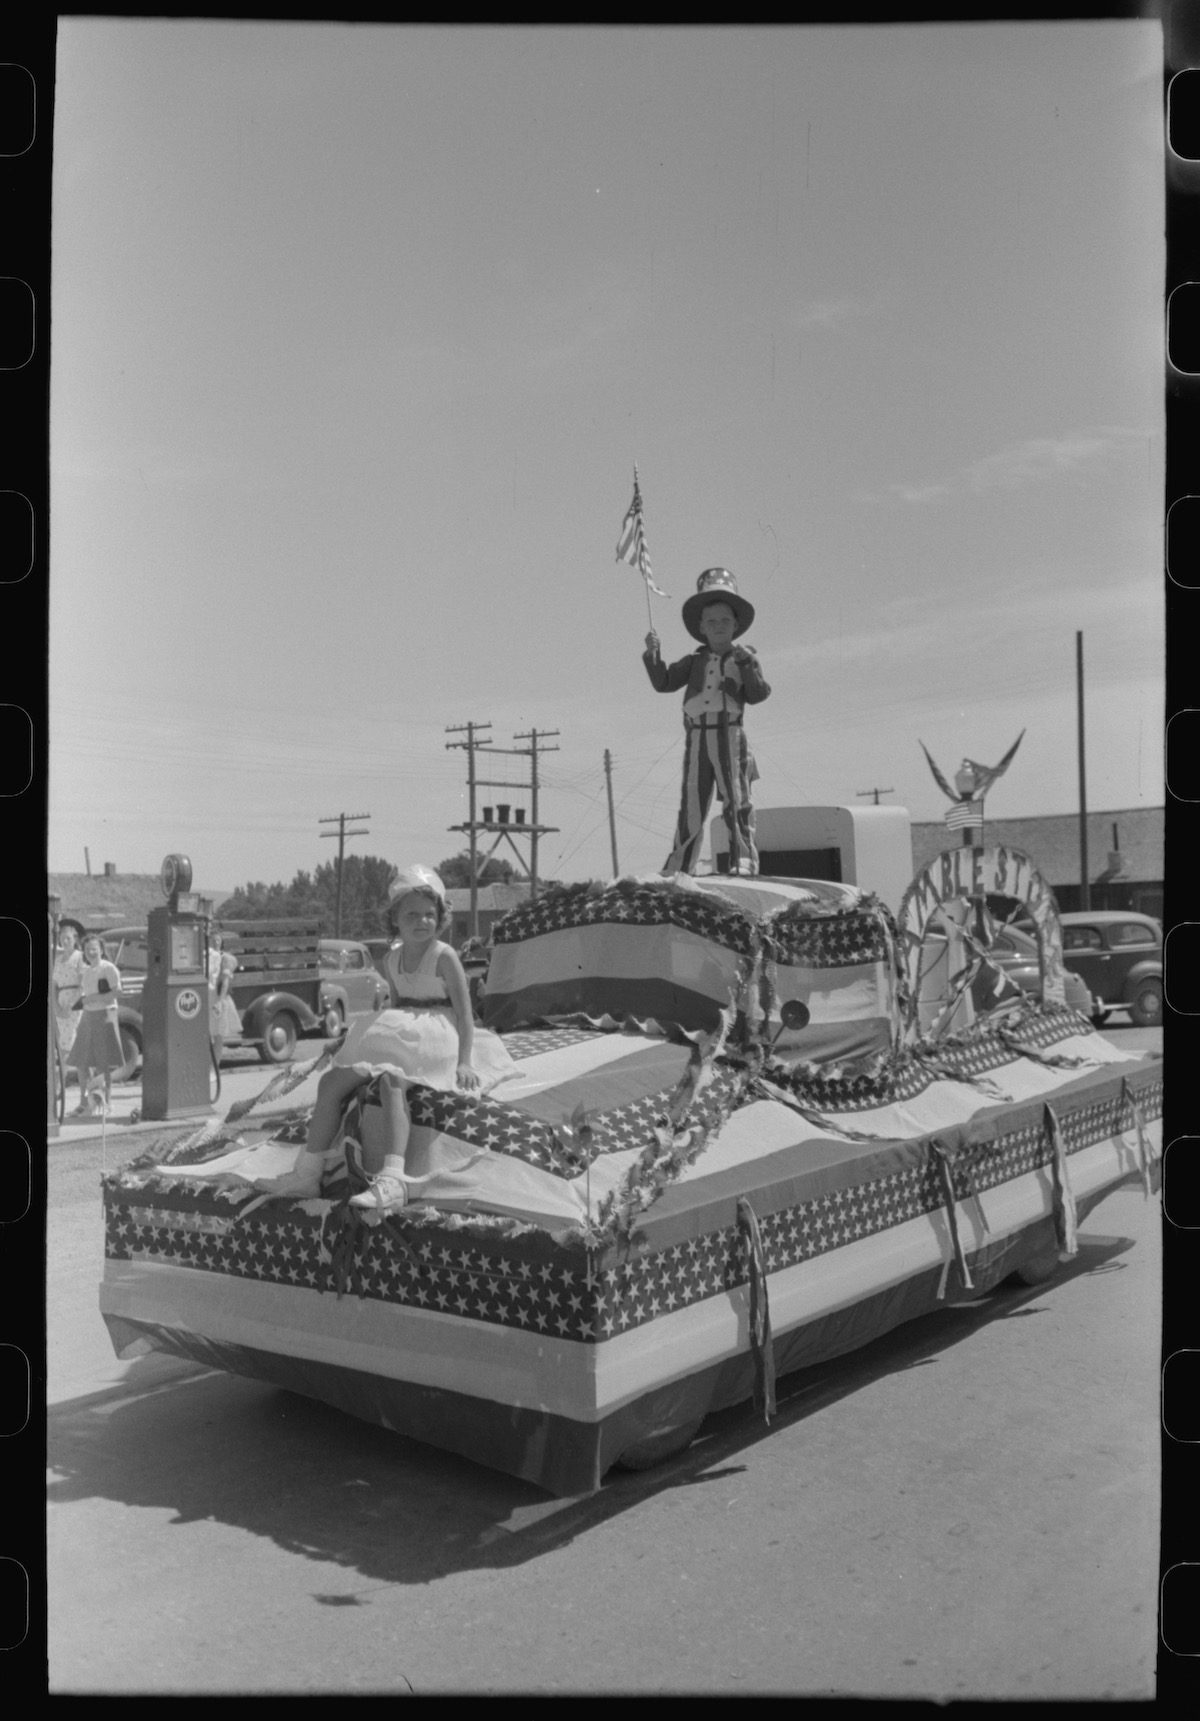 July Fourth Independence Day Vale Oregon 1941 Russell Lee